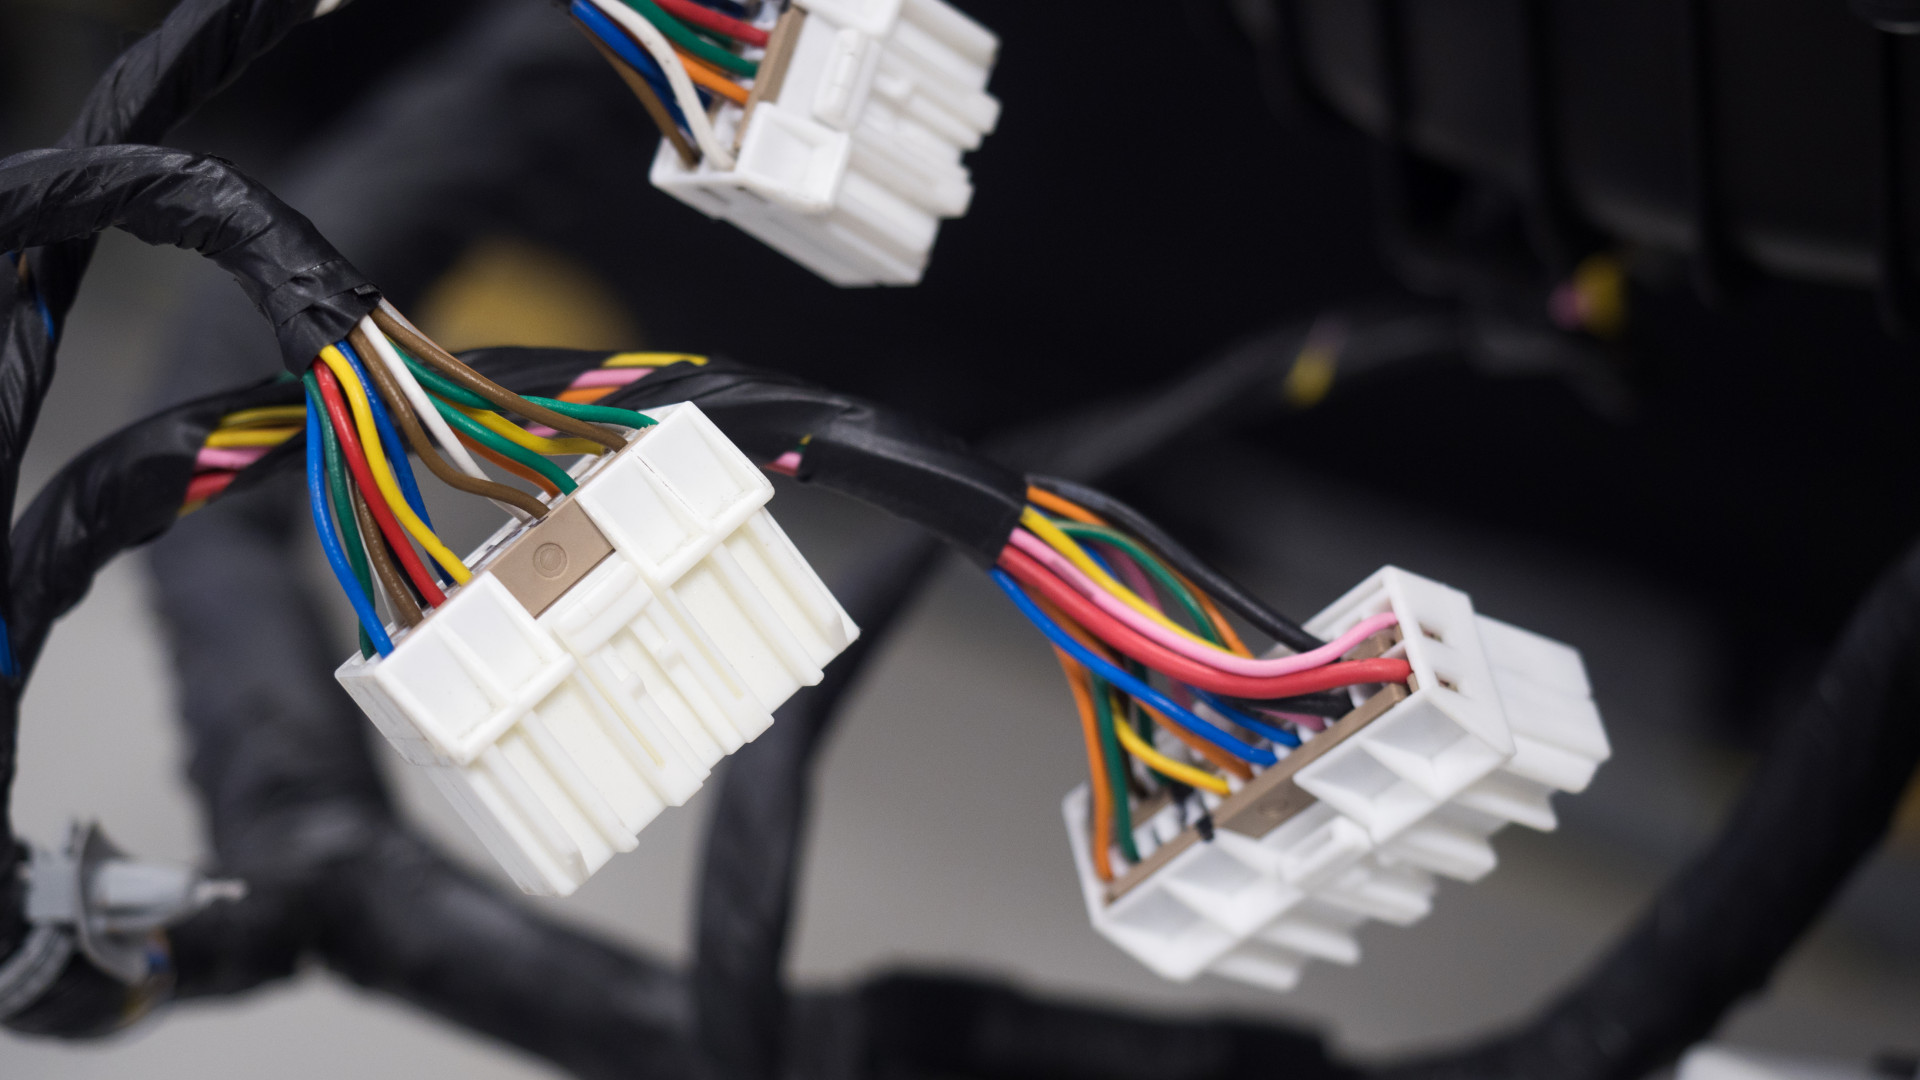 Keep the original wiring system of your vehicles intact